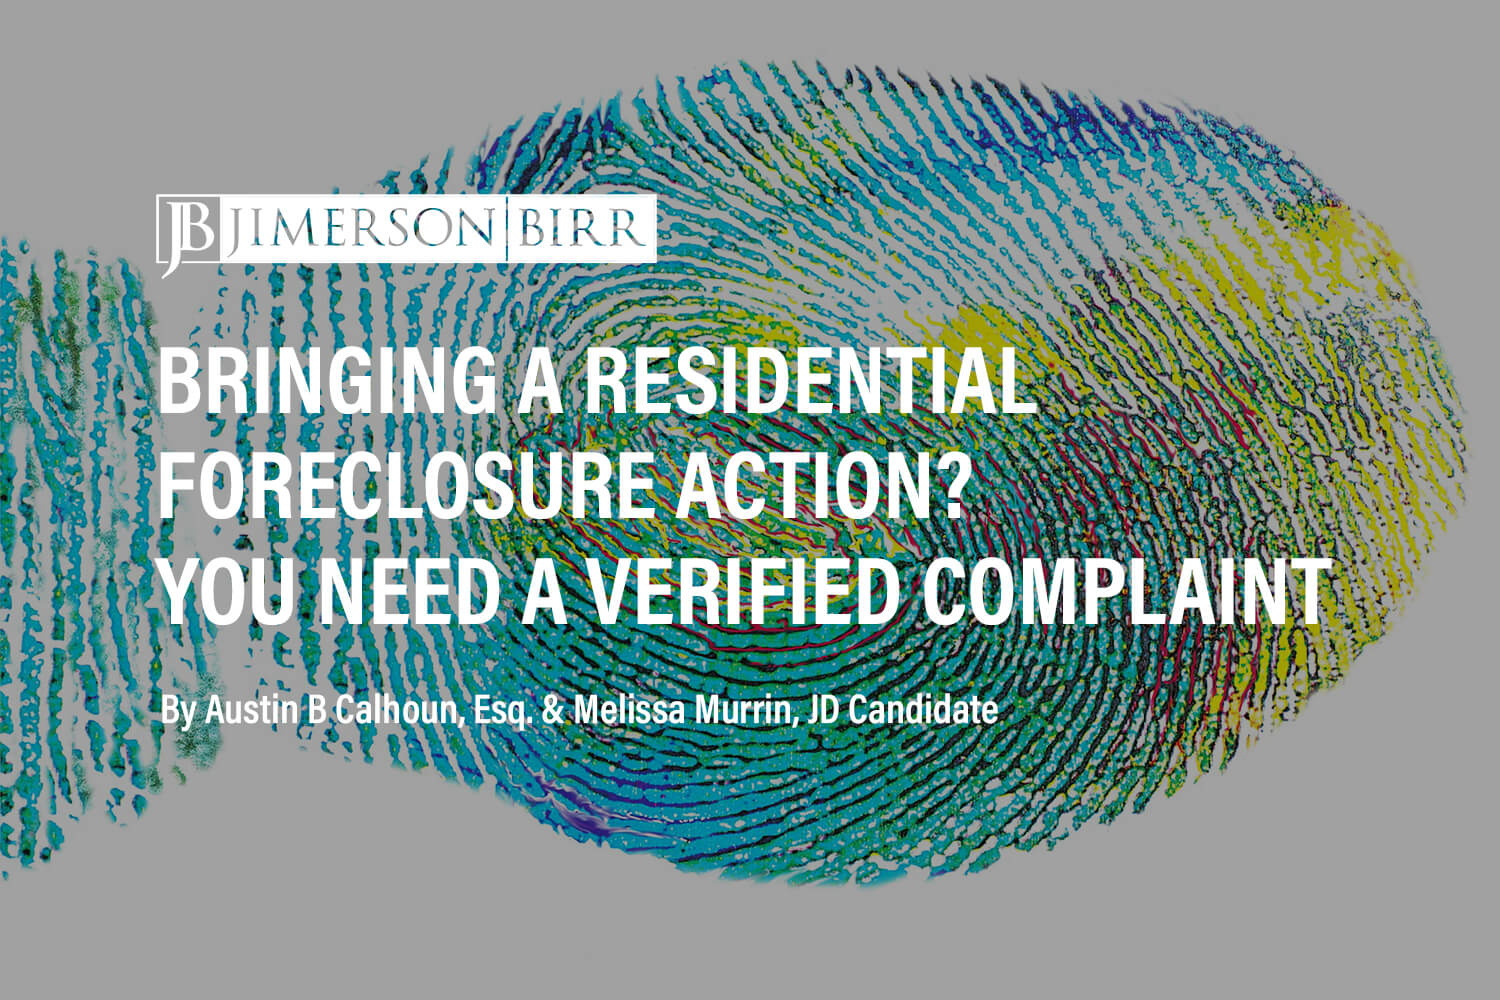 Bringing a Residential Foreclosure Action? You Need a Verified Complaint